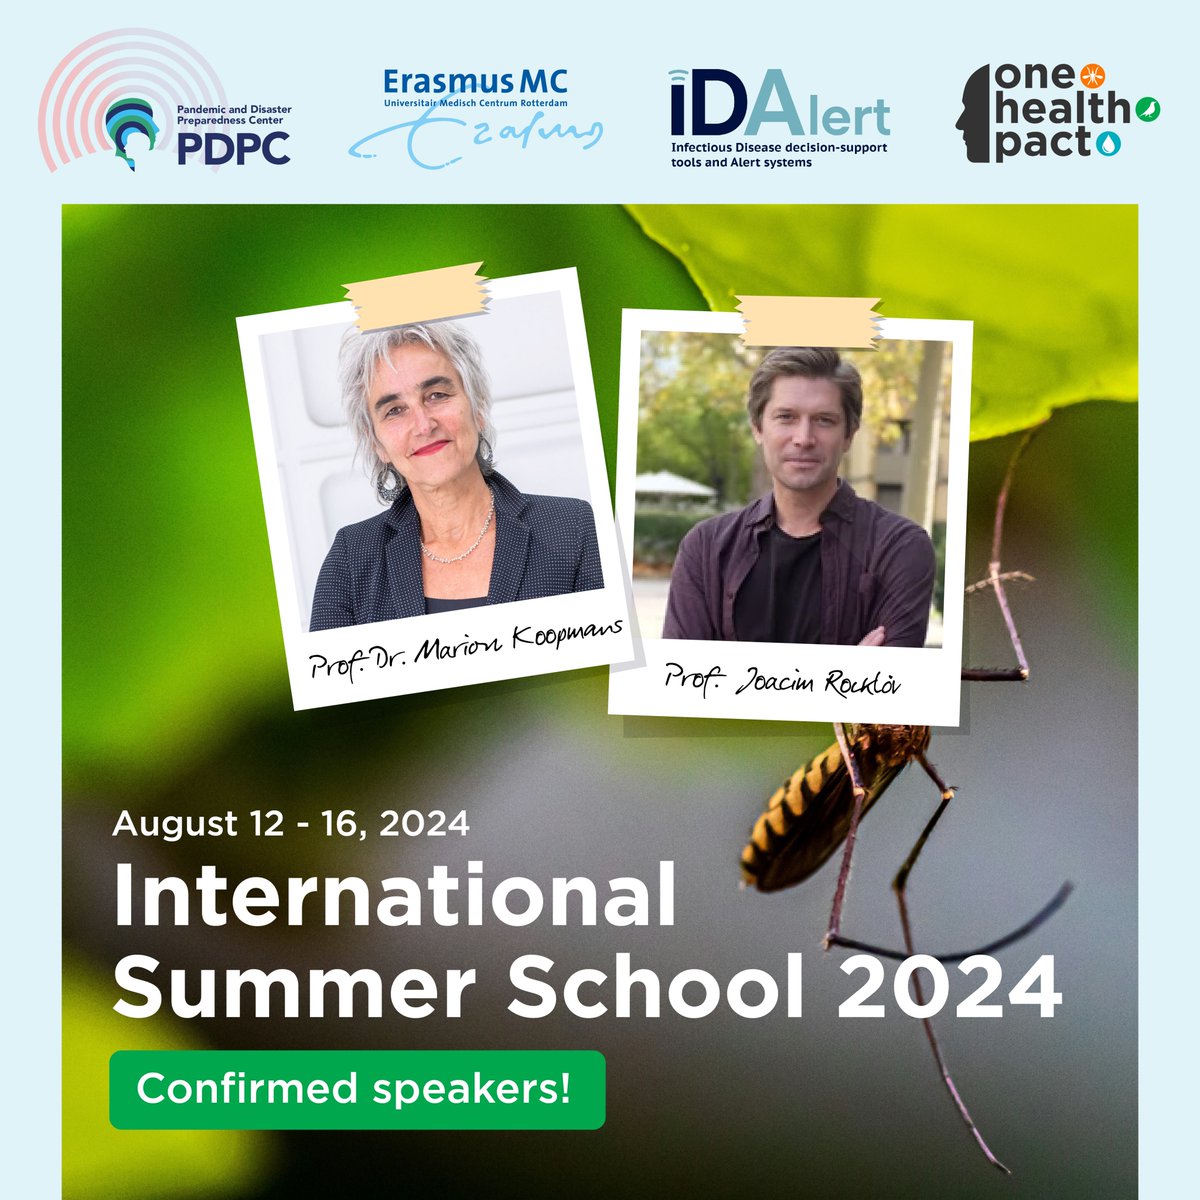 Delighted to share that two inspiring key note speakers are confirmed for International Summer School 2024: @MarionKoopmans and @JoacimRocklov Dive into a week of insightful discussions and networking!🚀Register here: bit.ly/3UsY8Cv #SummerSchool #Learning #Networking